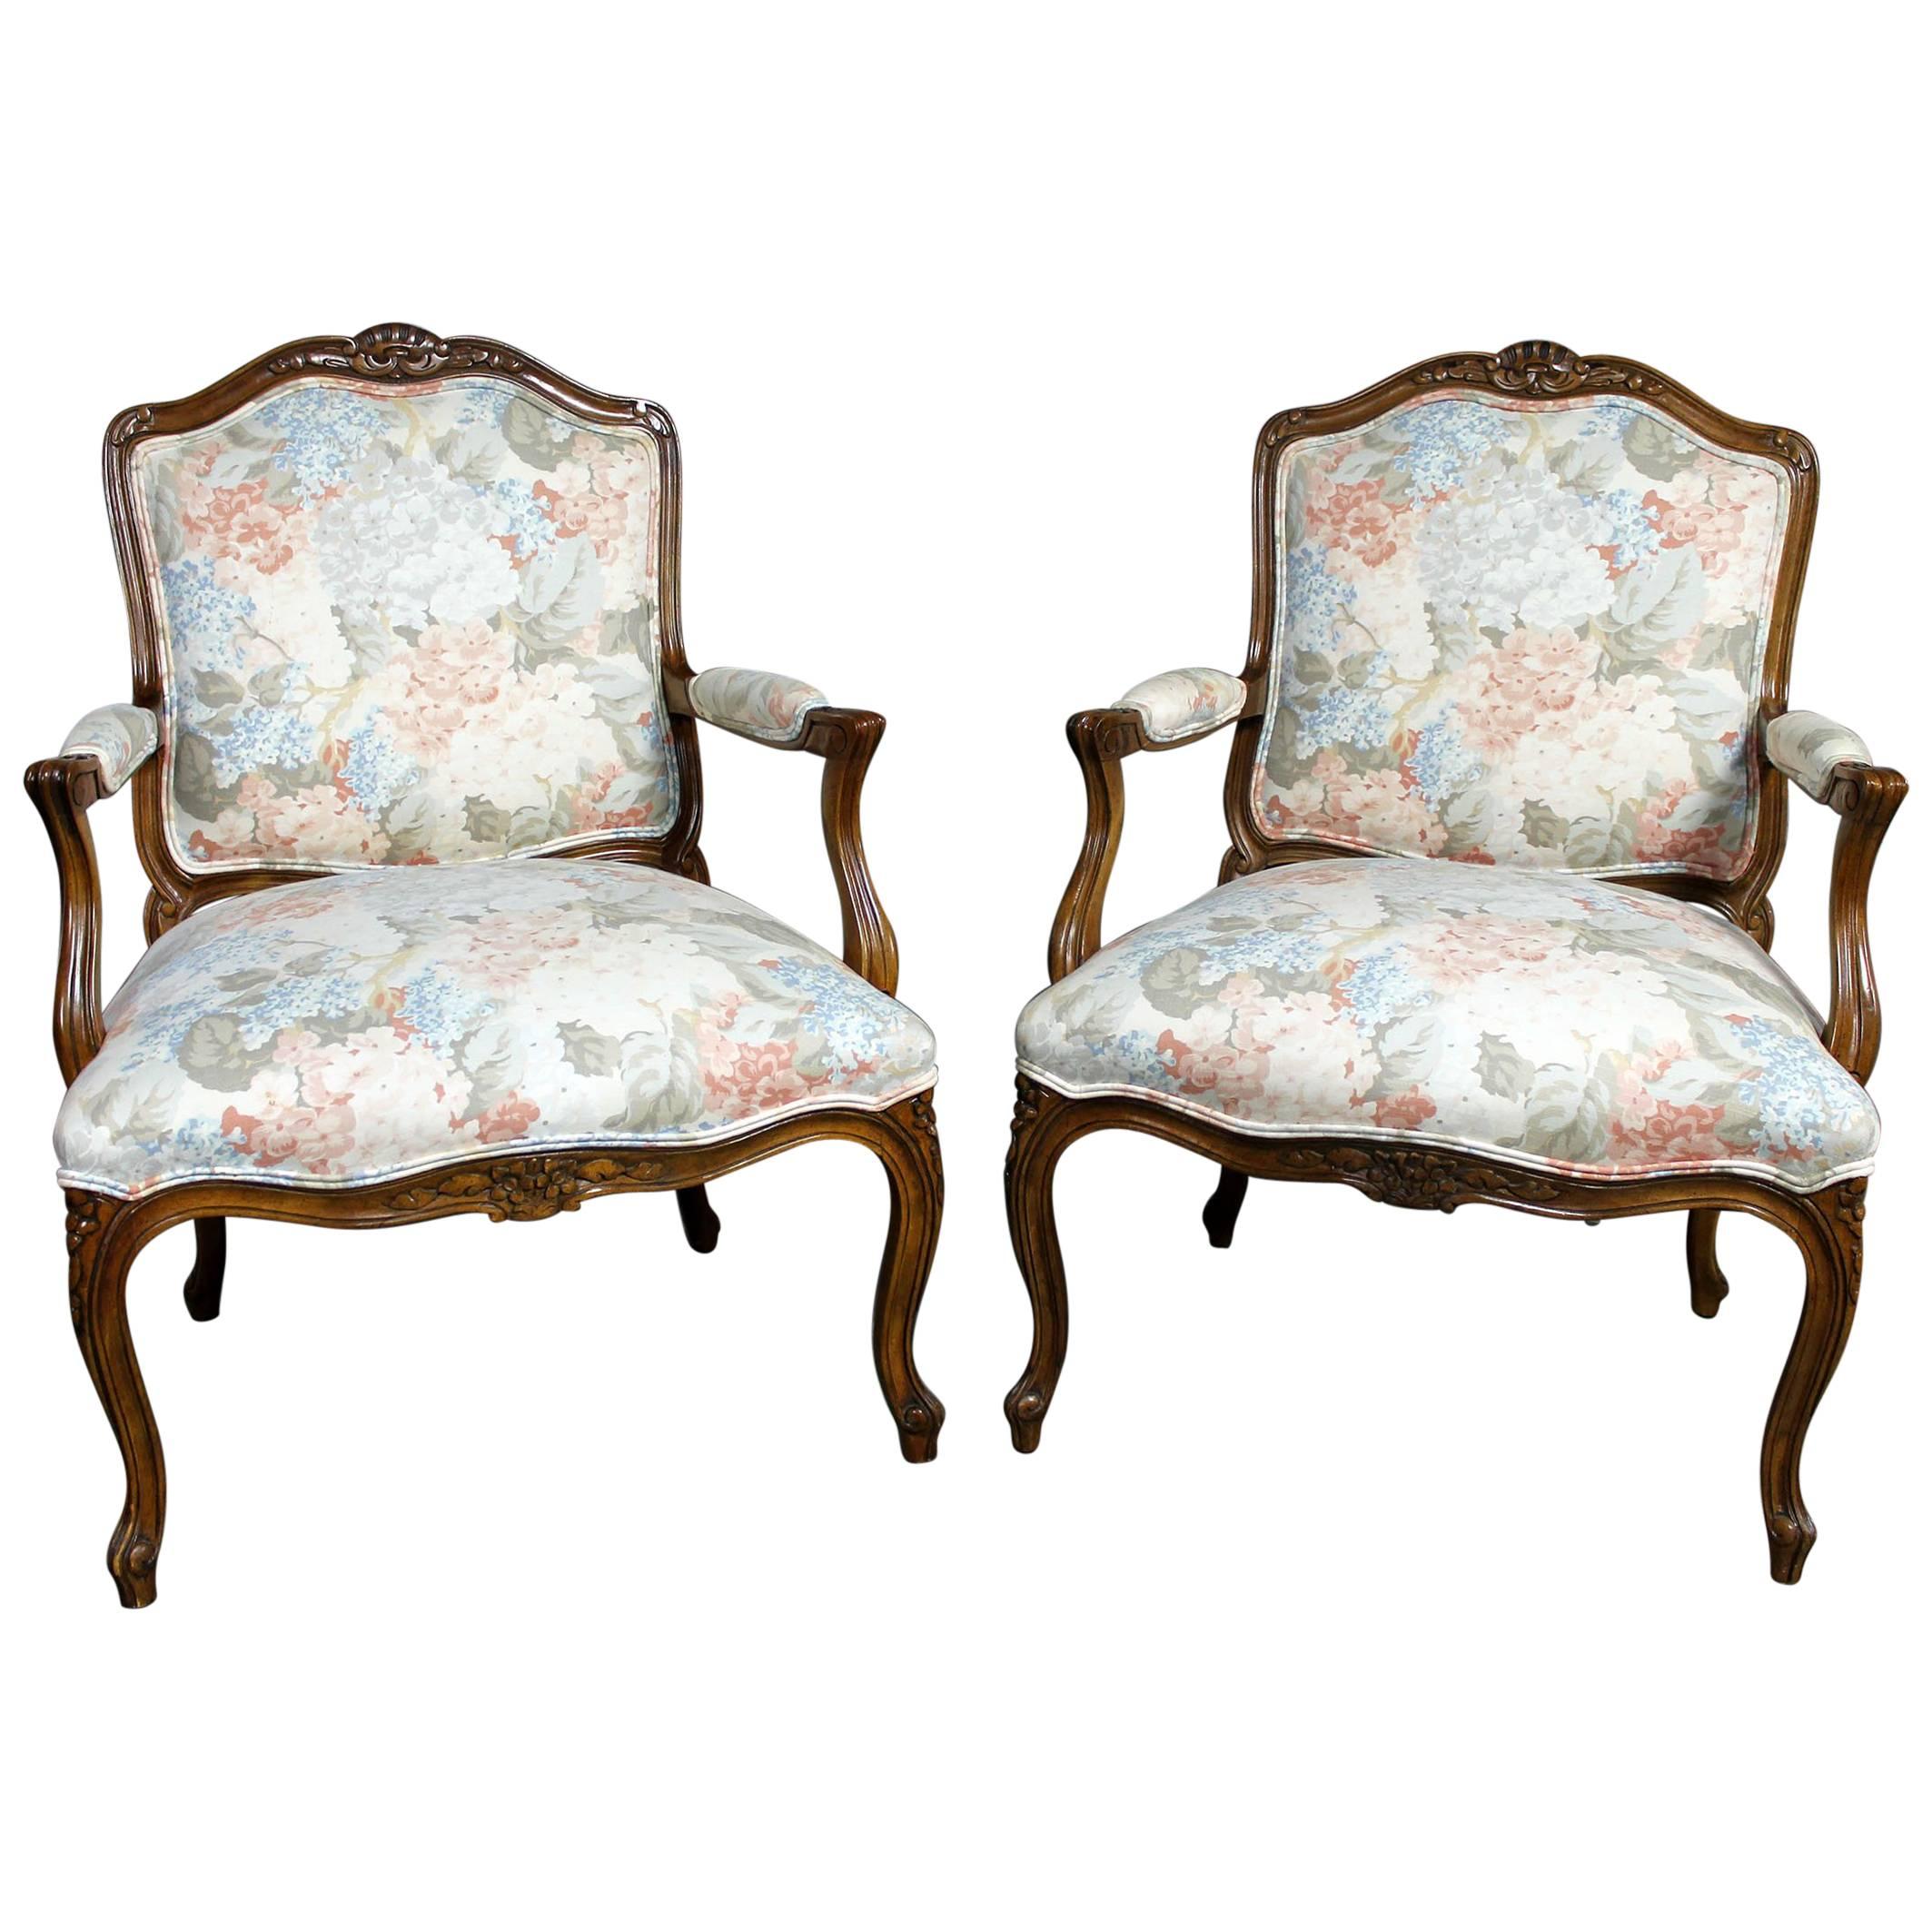 Pair of Louis XV Style French Country Fauteuil Armchairs by Heritage Furniture